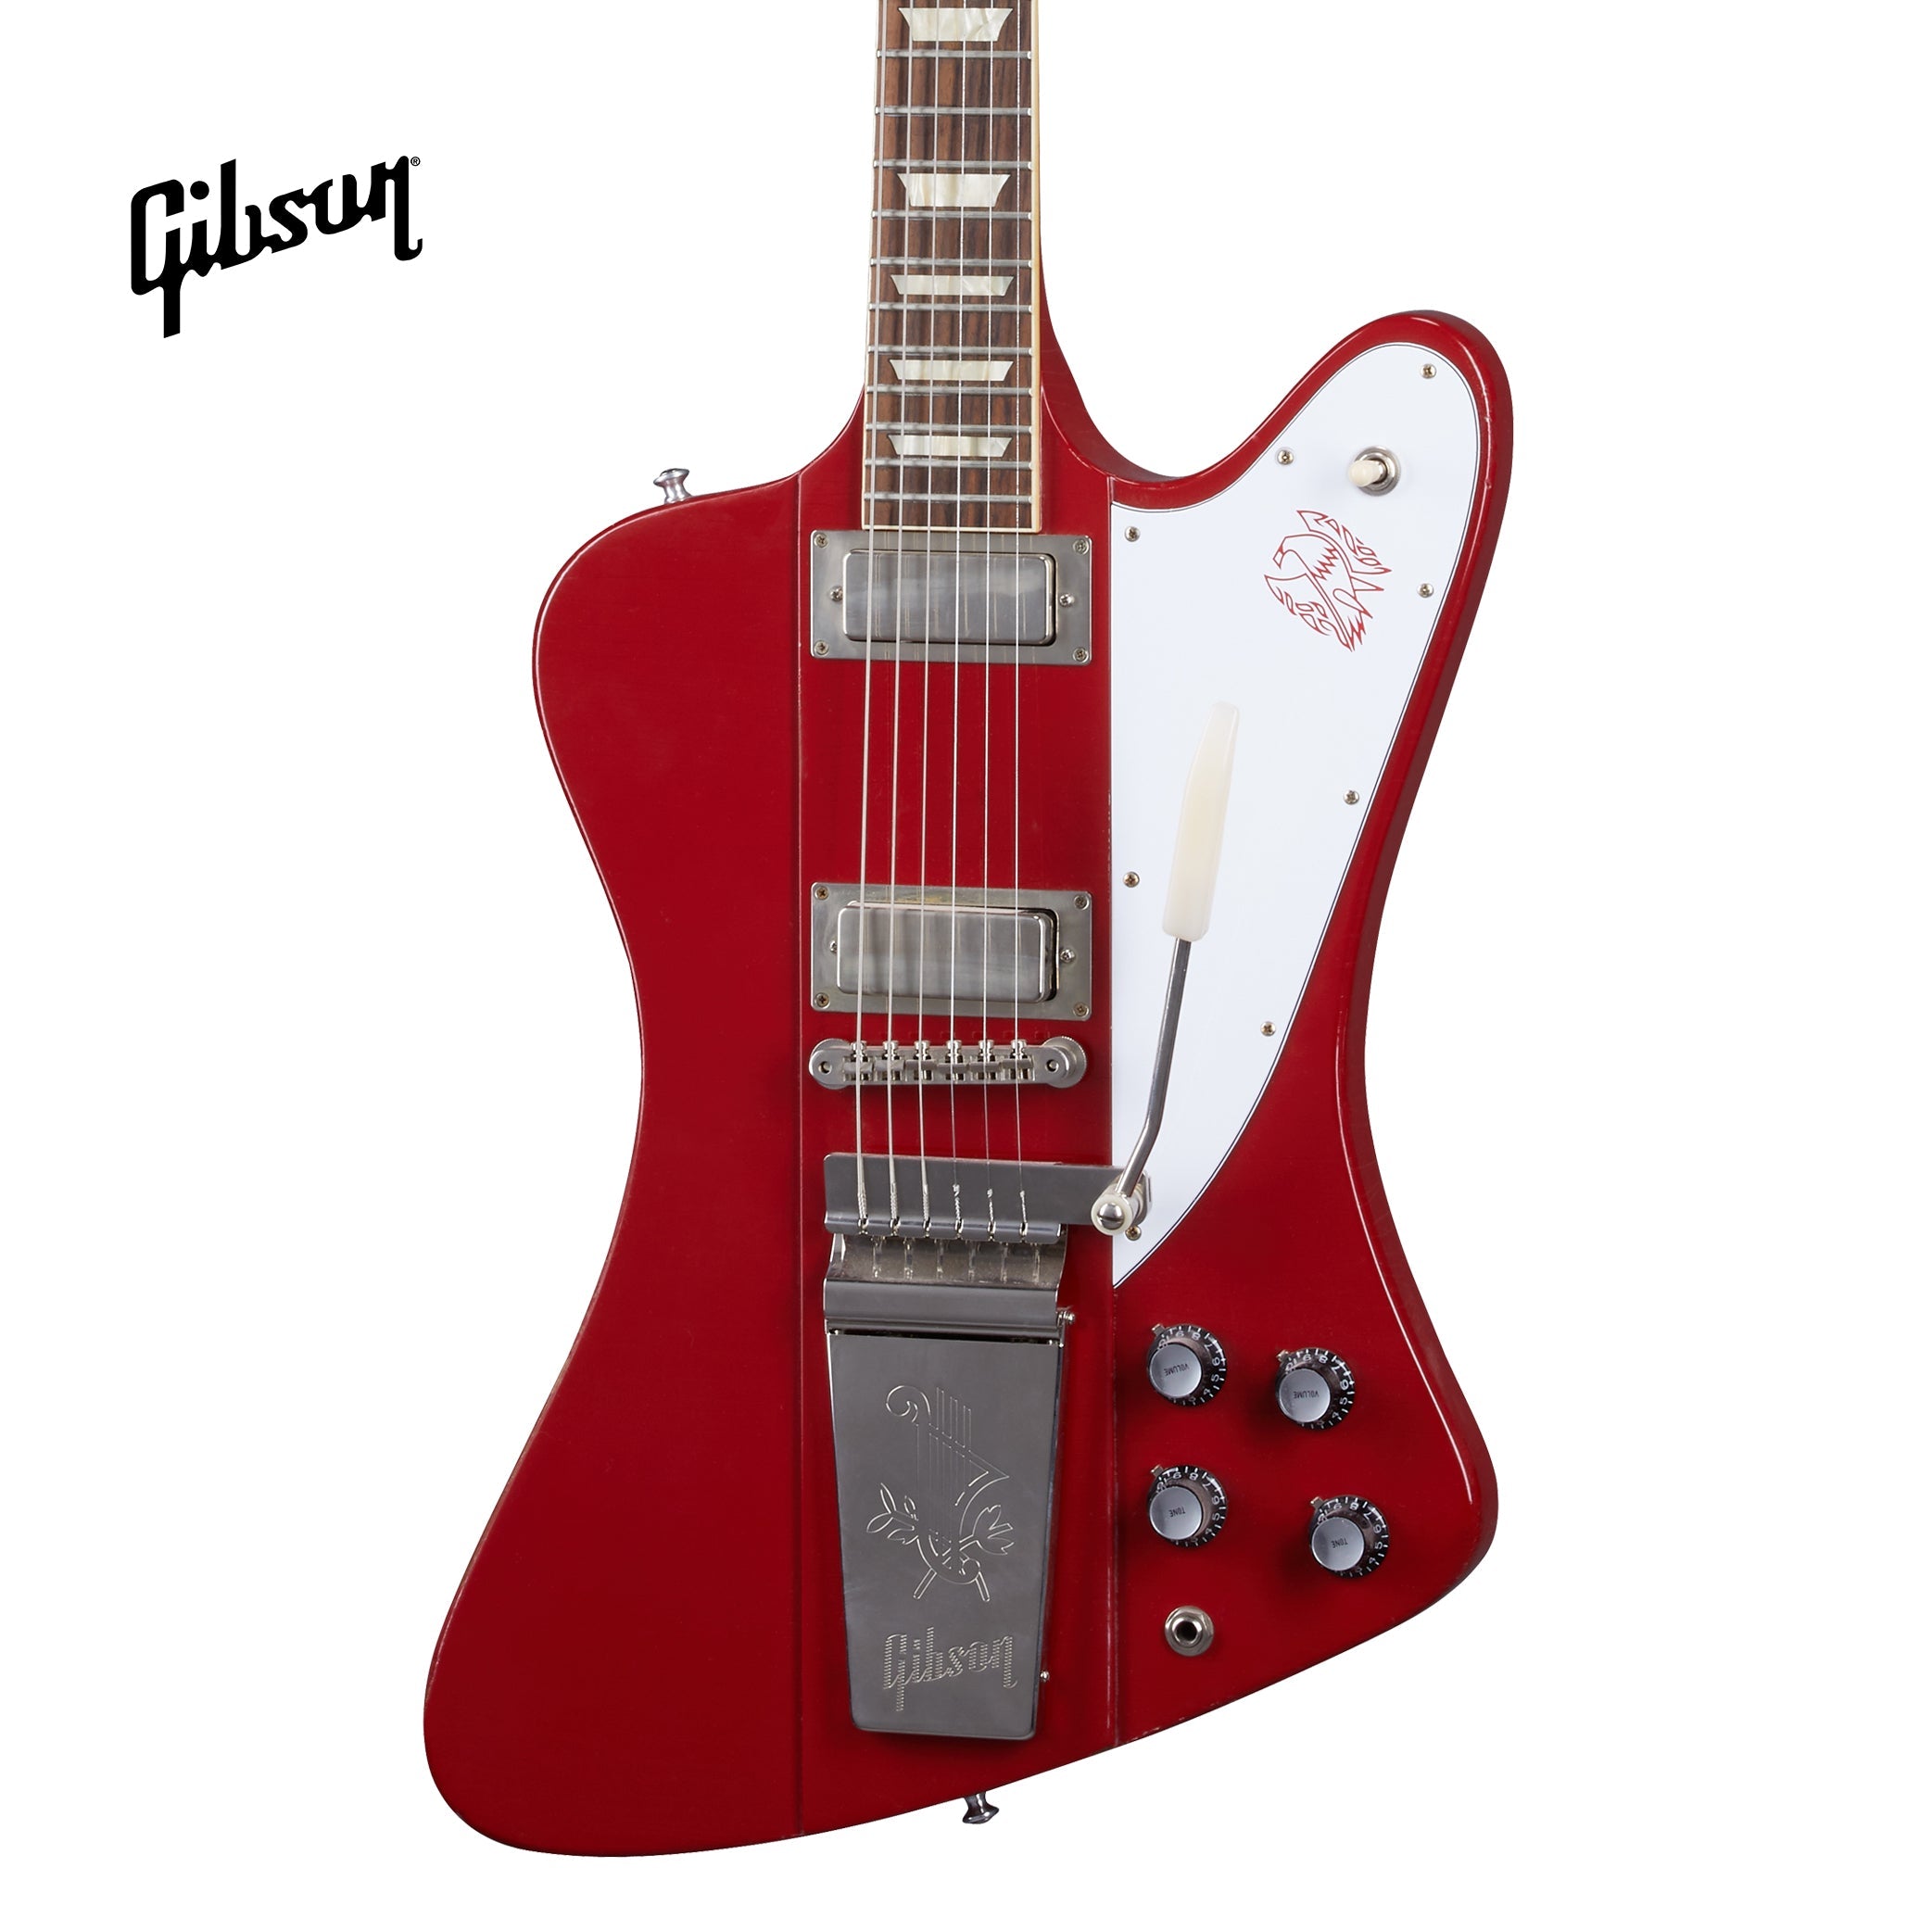 GIBSON 1963 FIREBIRD V WITH MAESTRO VIBROLA LIGHT AGED ELECTRIC GUITAR - CARDINAL RED